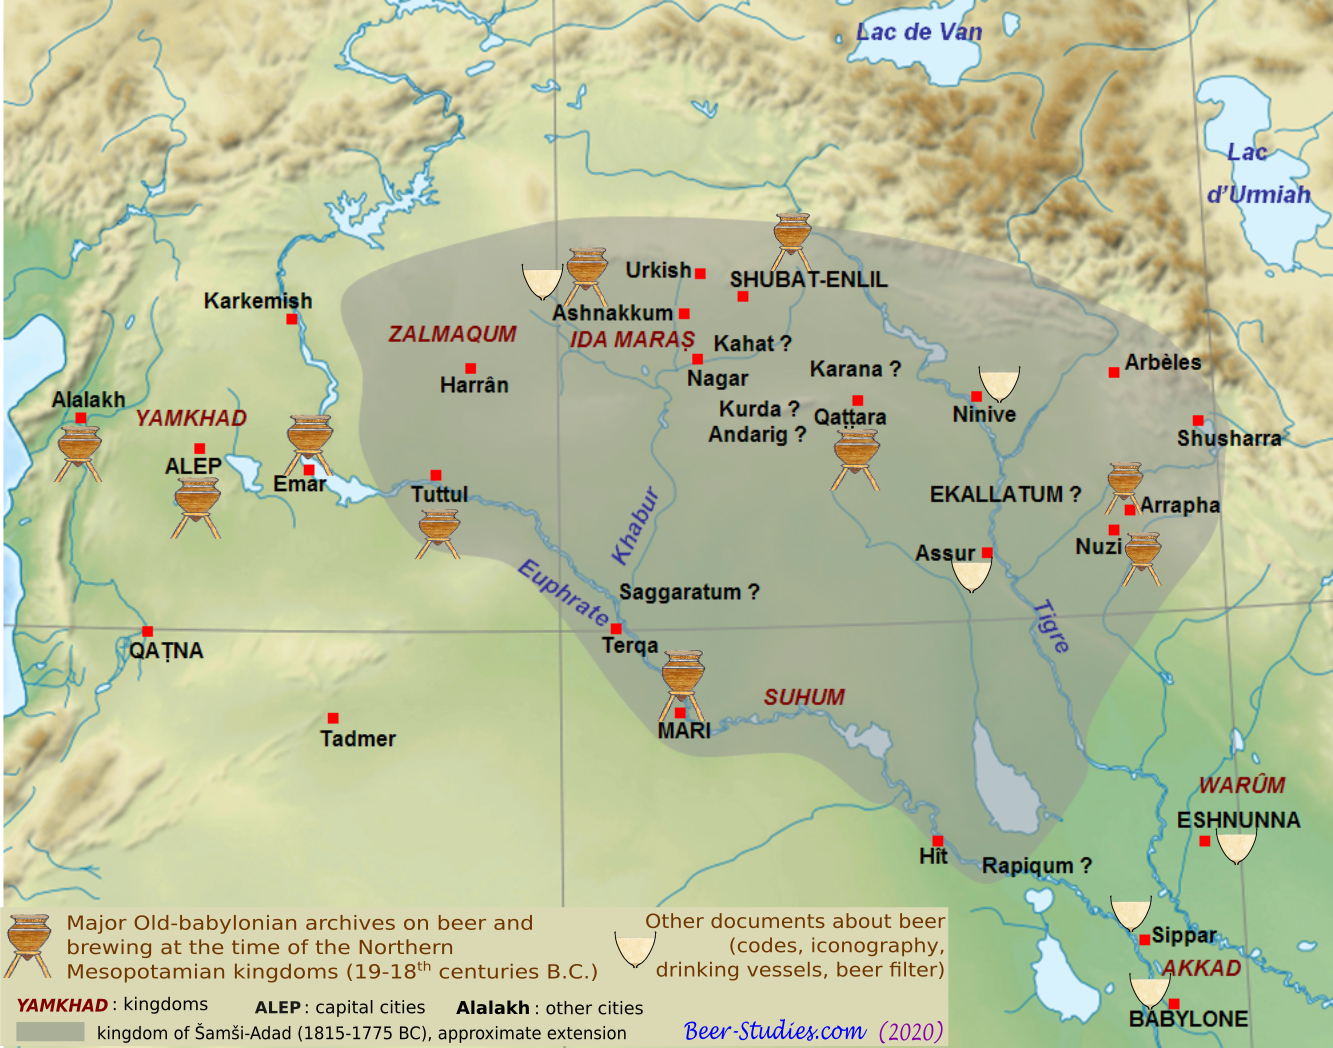 Archives on beer & brewing from the Northern-Mesopotamia kingdoms